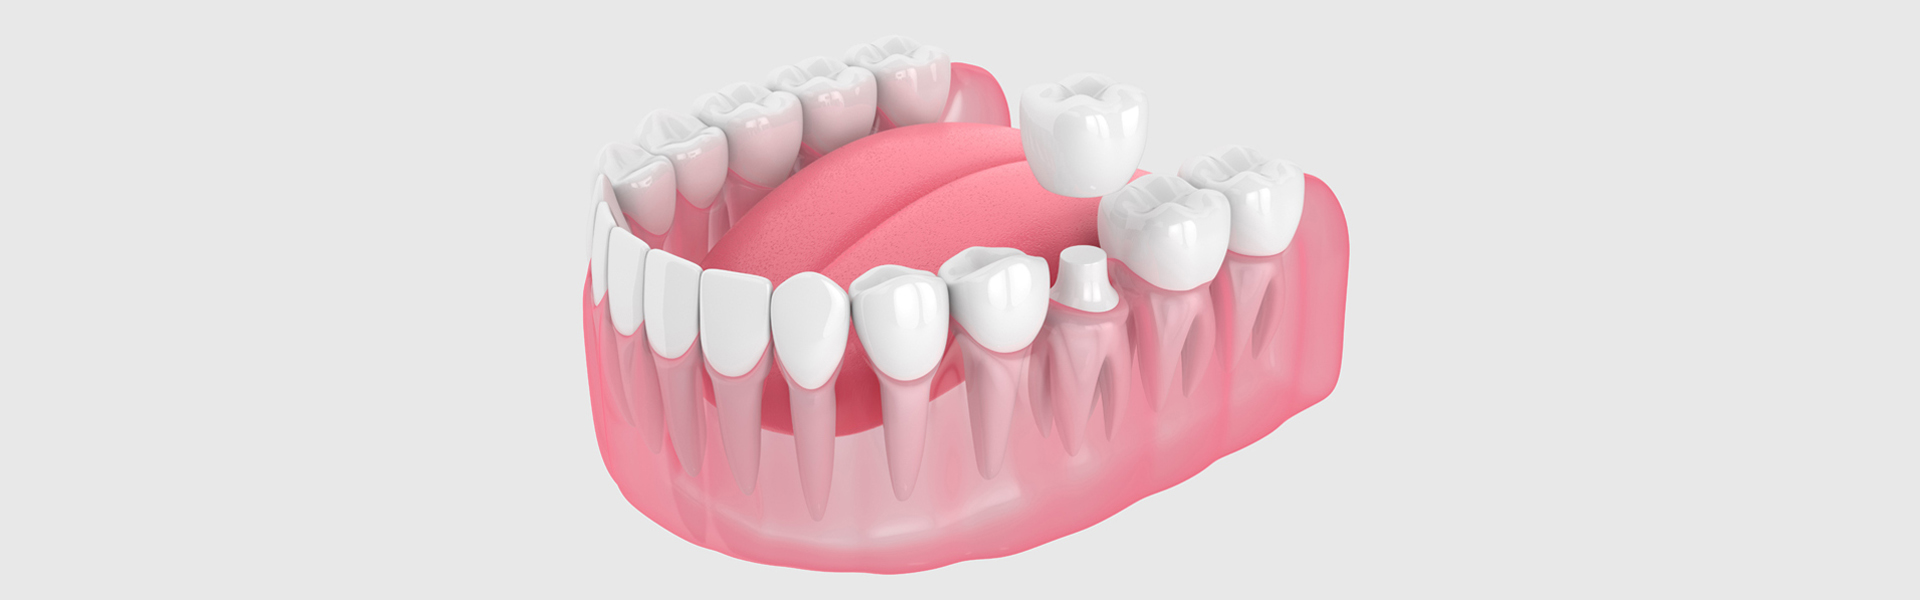 Restoring Both Beauty and Functionality: The Power of Dental Crowns